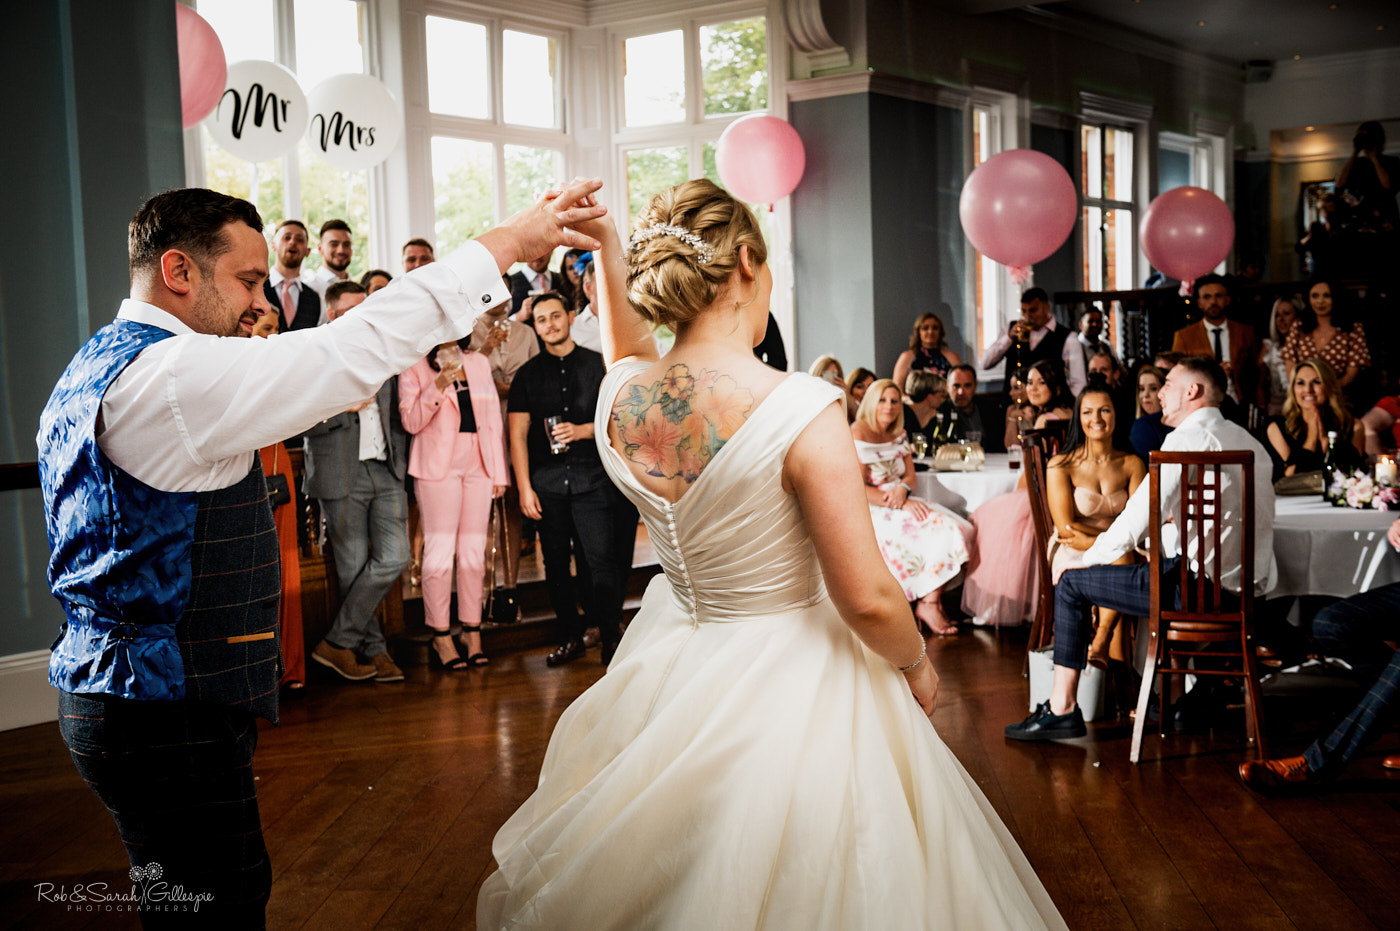 First dance at Pendrell Hall wedding